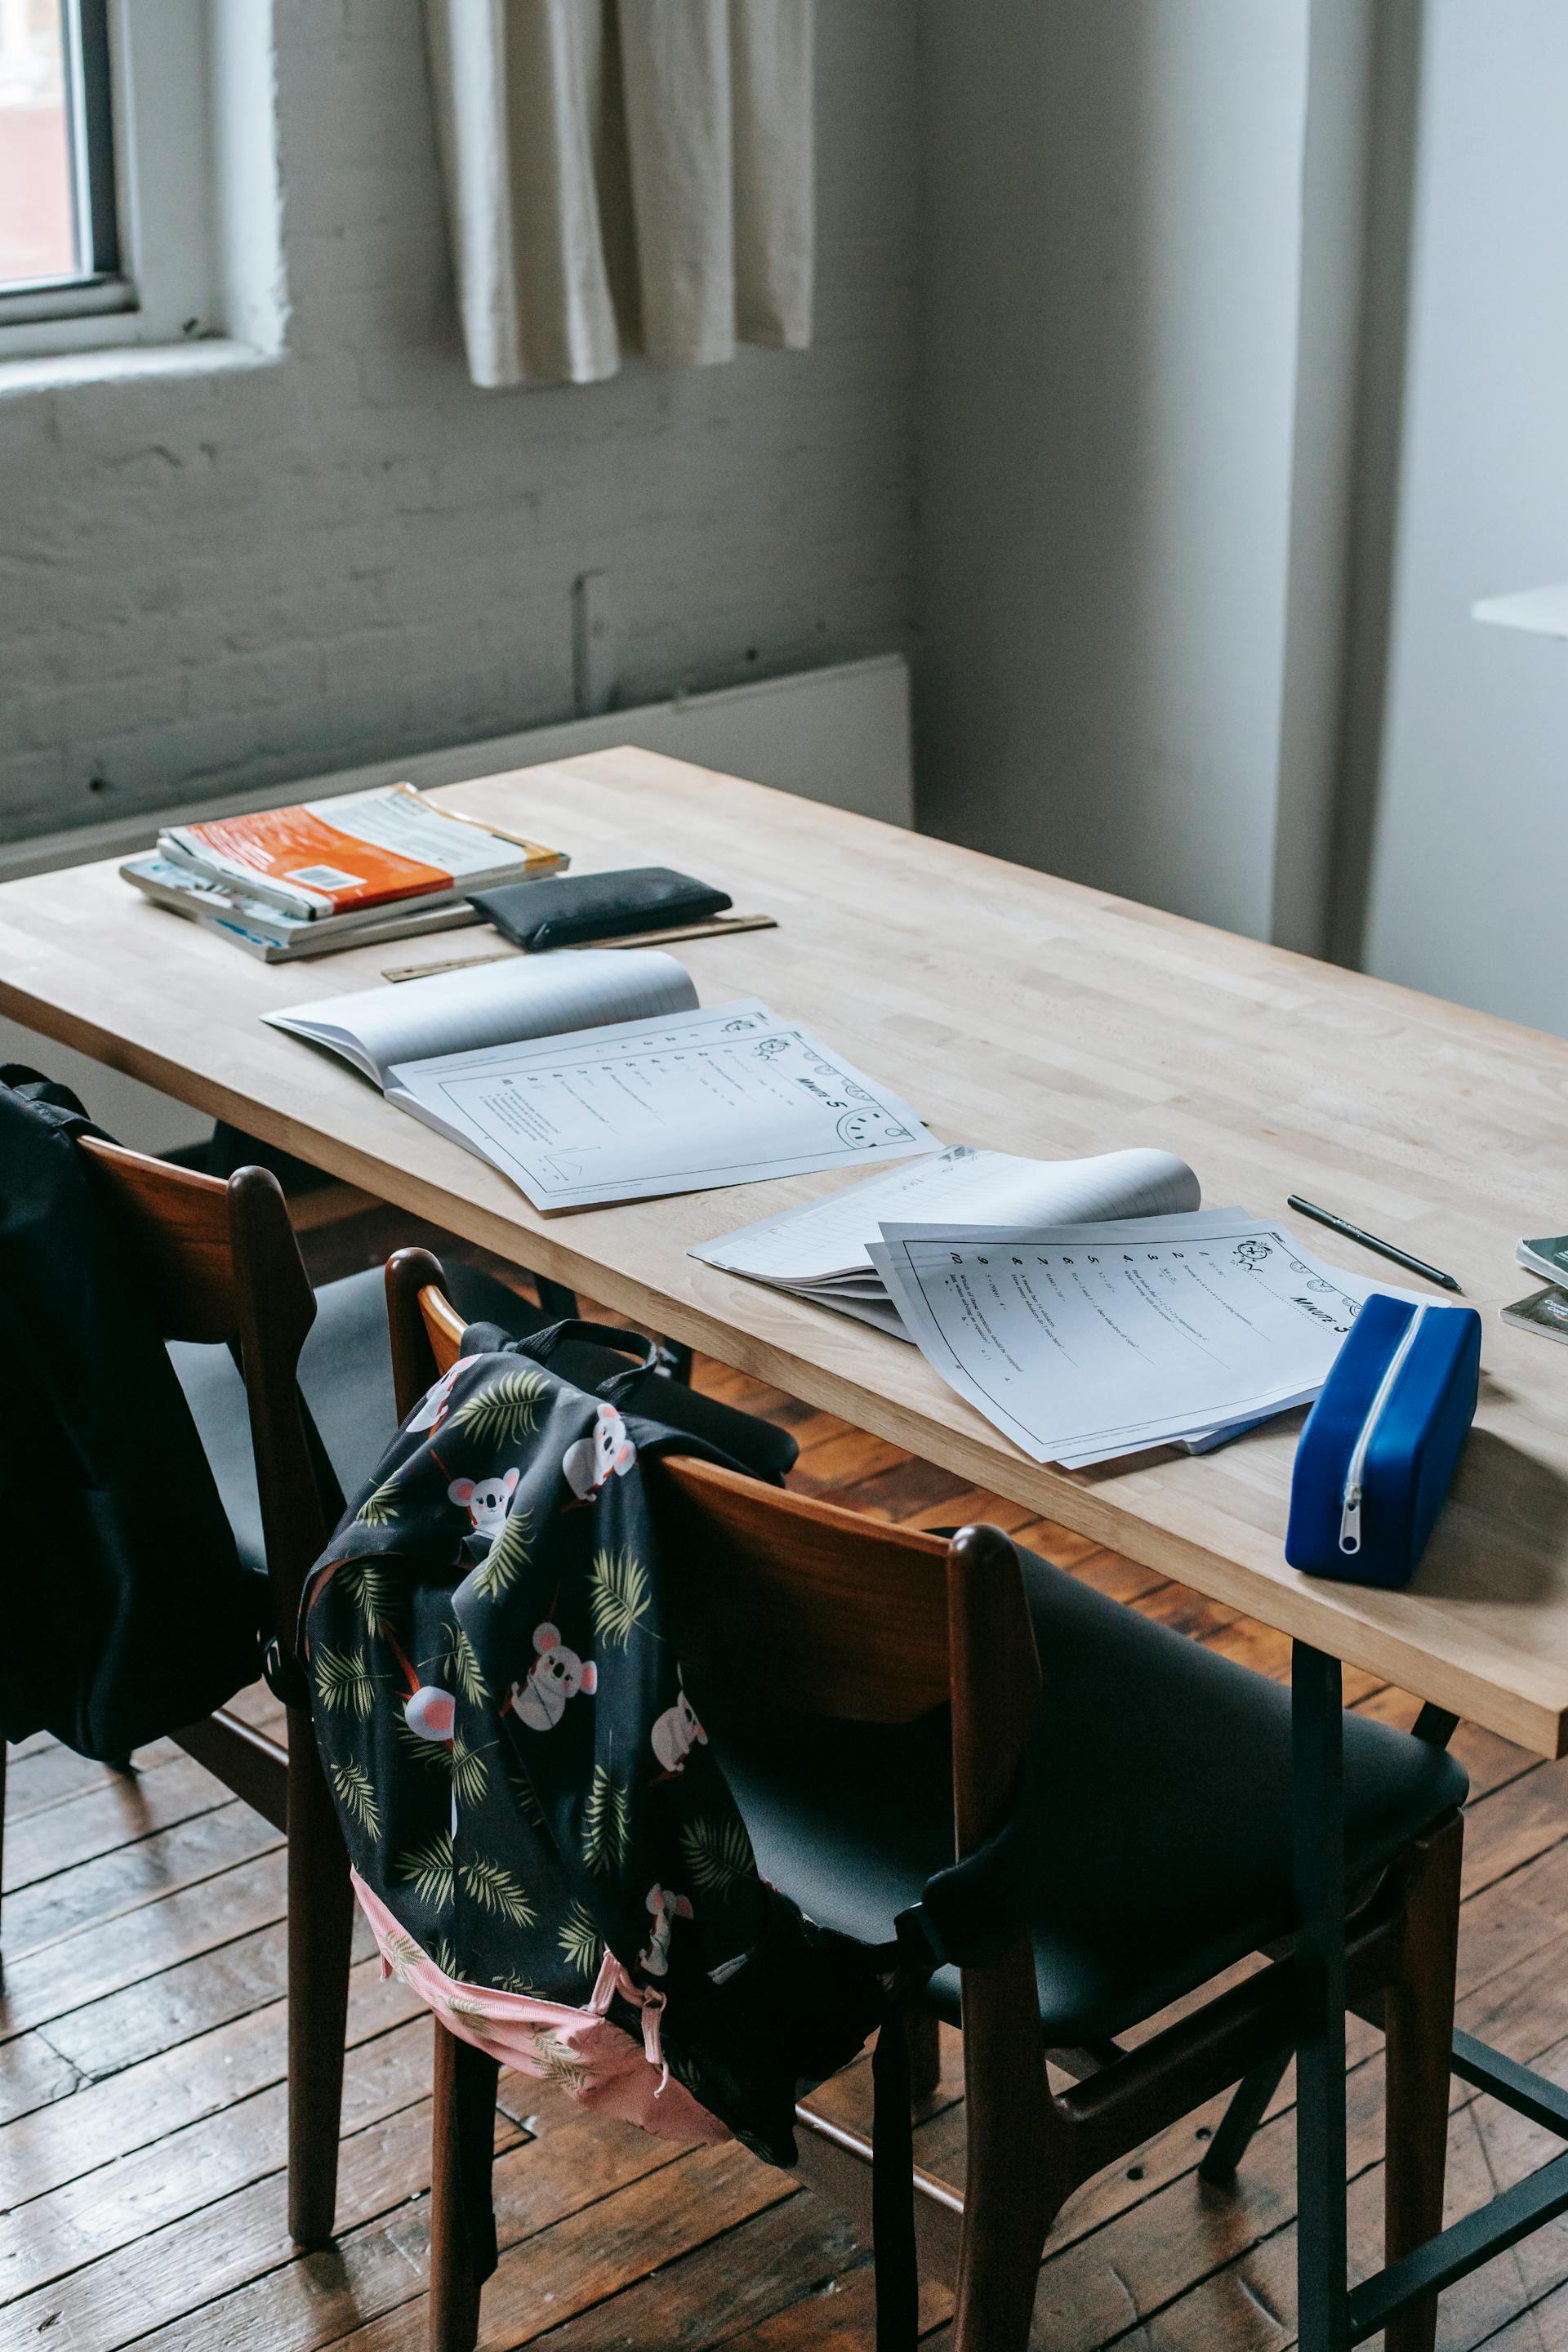 Training course material on a desk | Source: Pexels